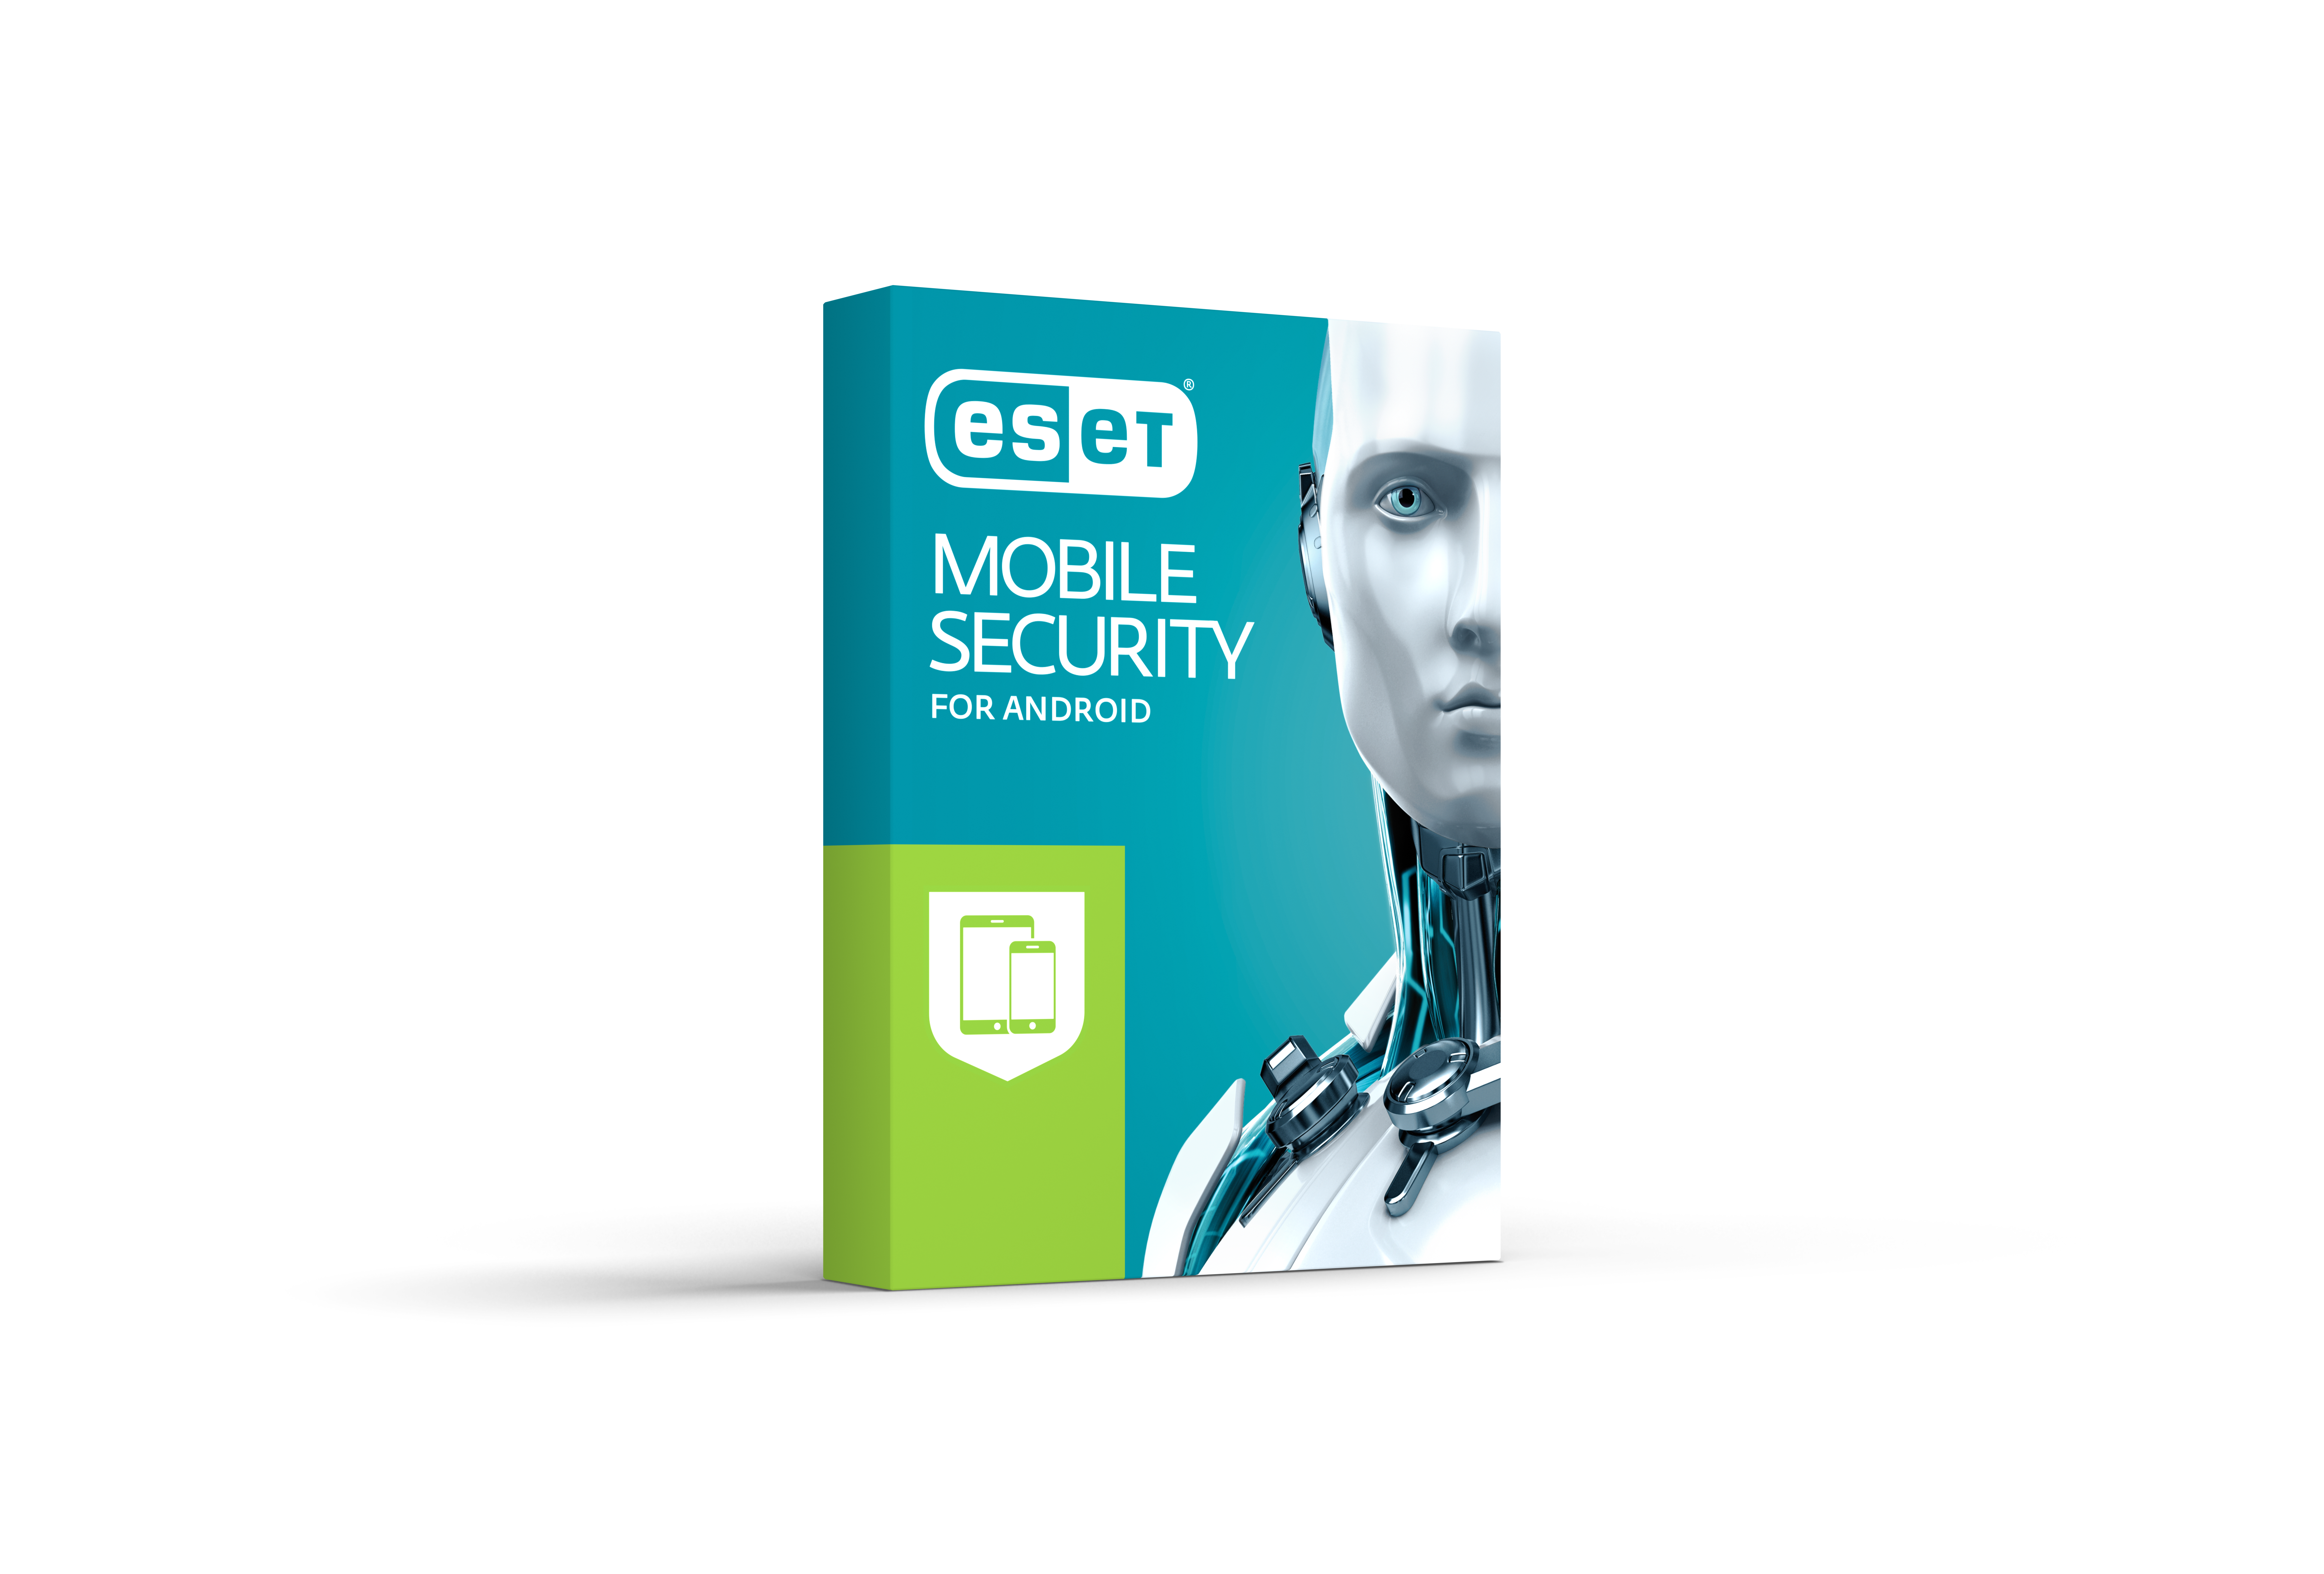 Eset's mobile security helps reduce pocket panic